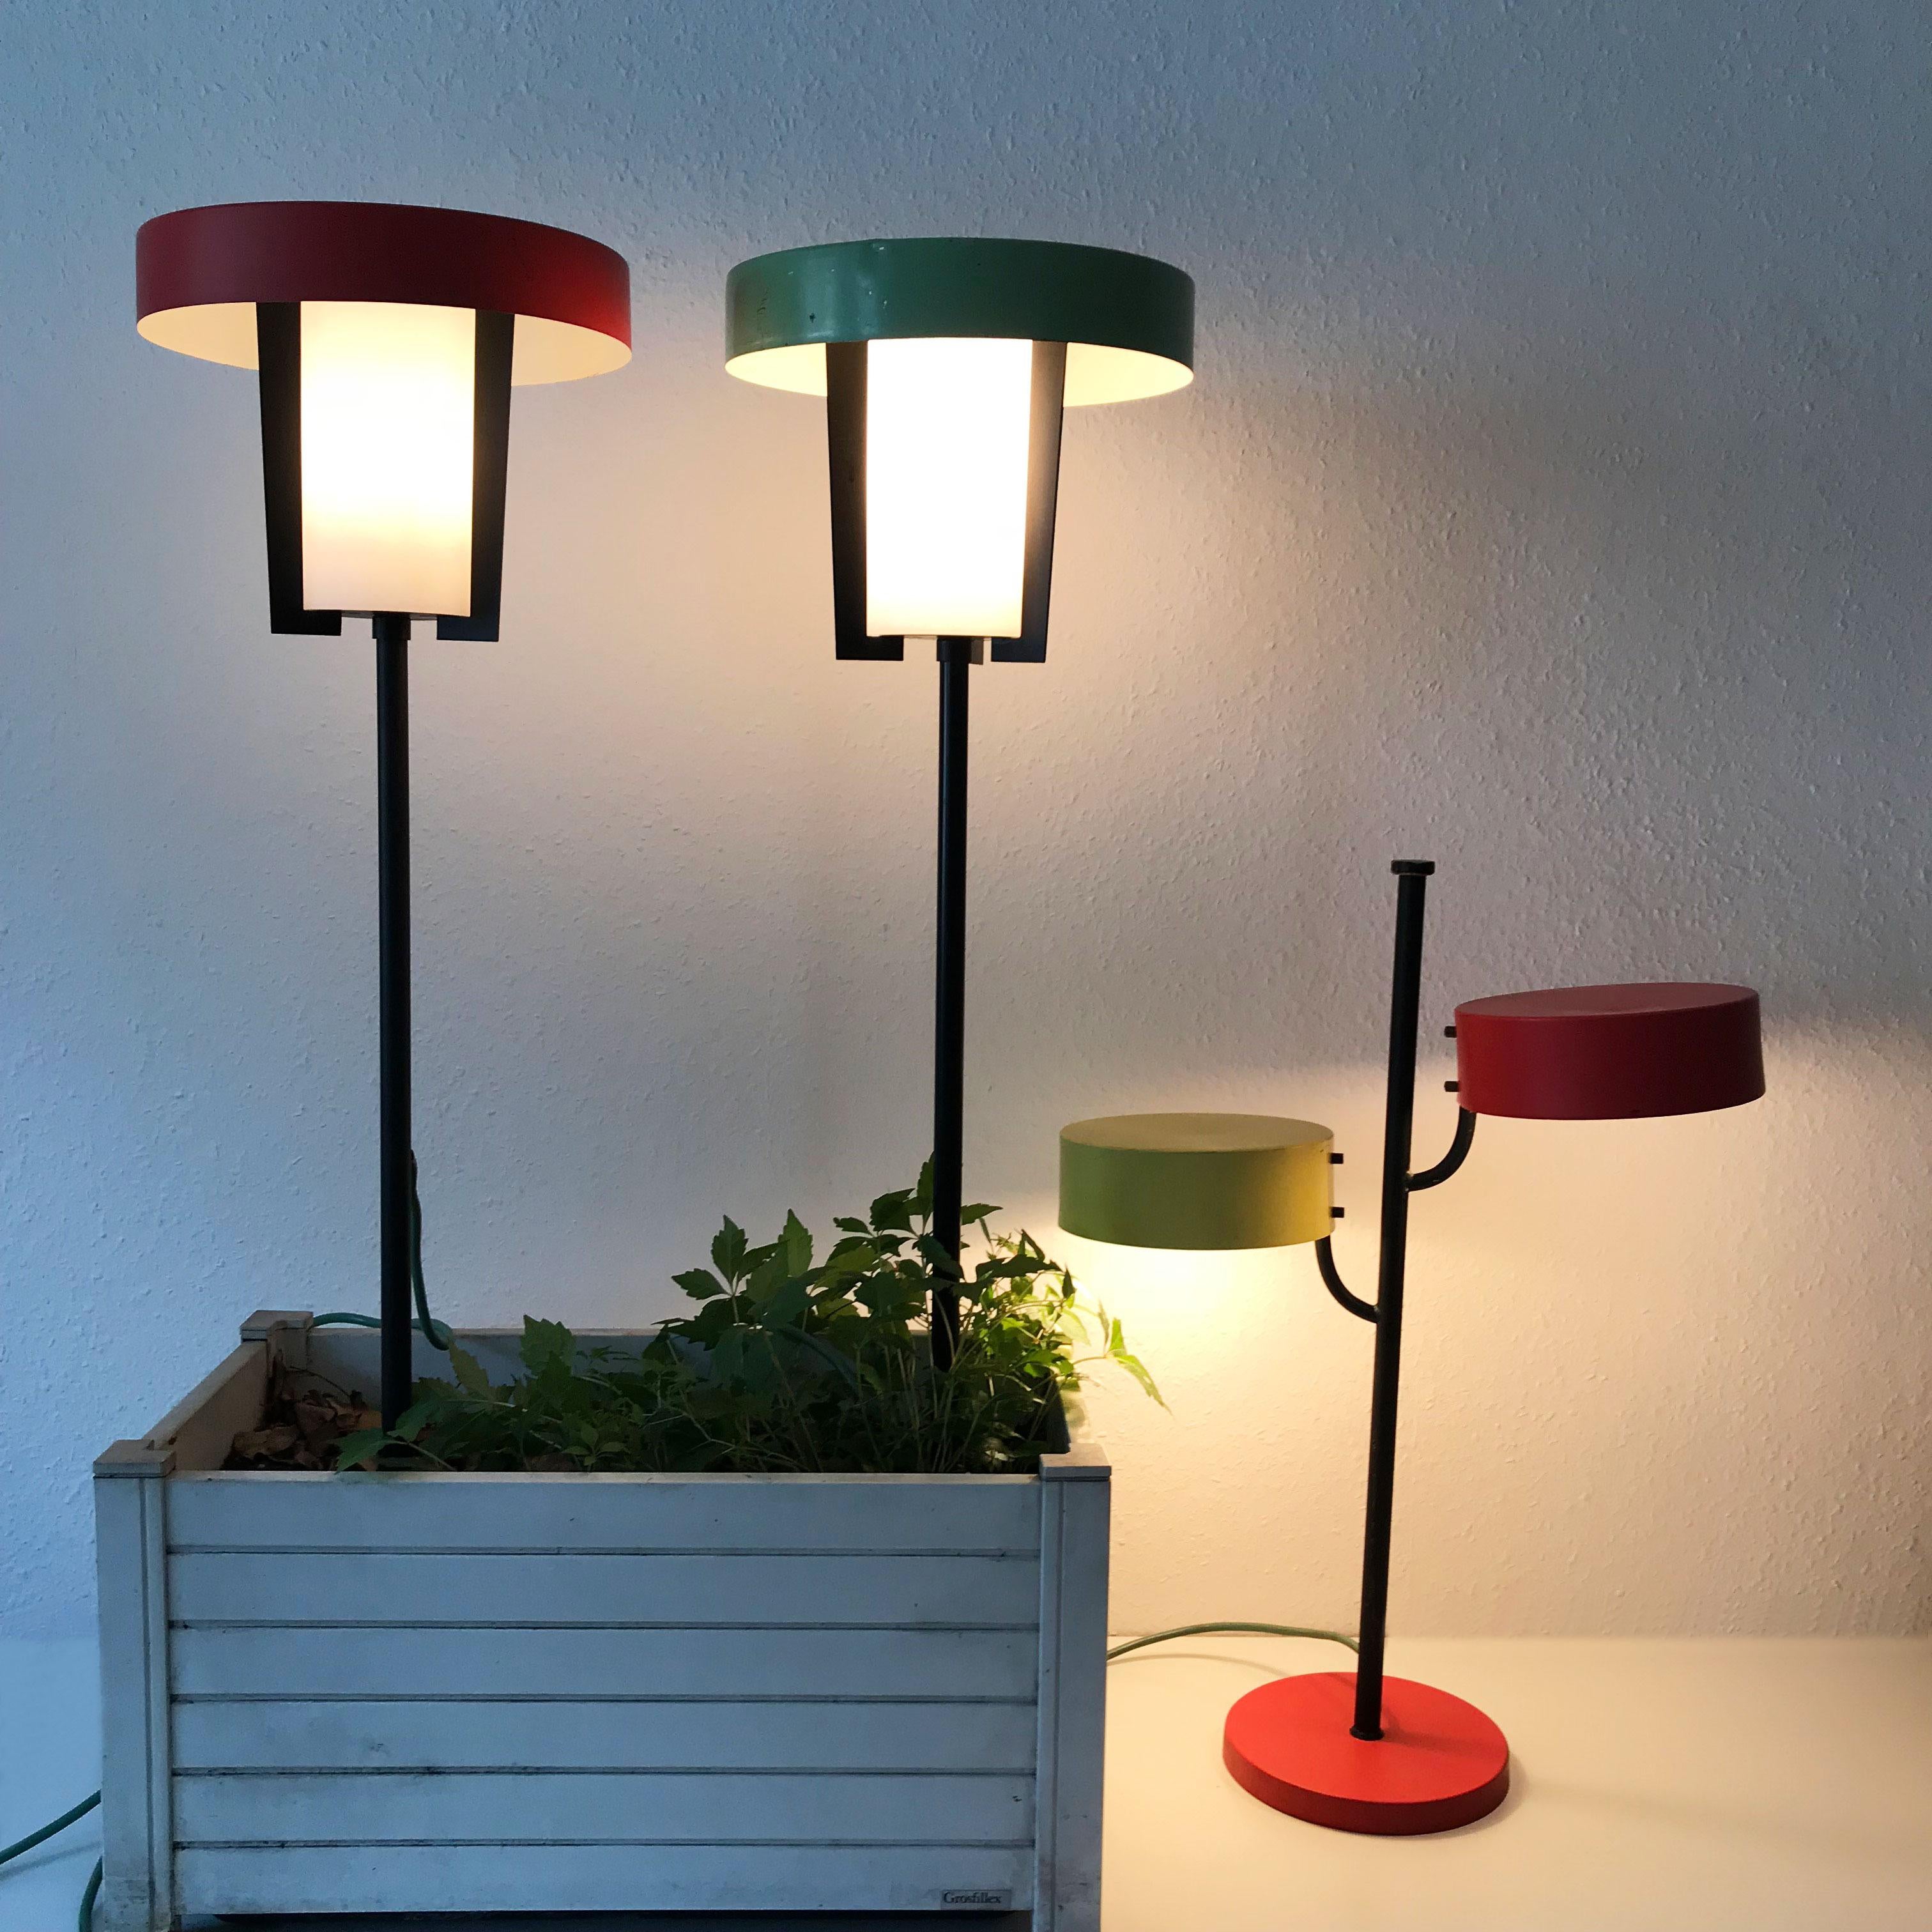 Set of Three Rare Outdoor or Garden Lamps by Kaiser Leuchten Germany 1950s For Sale 5